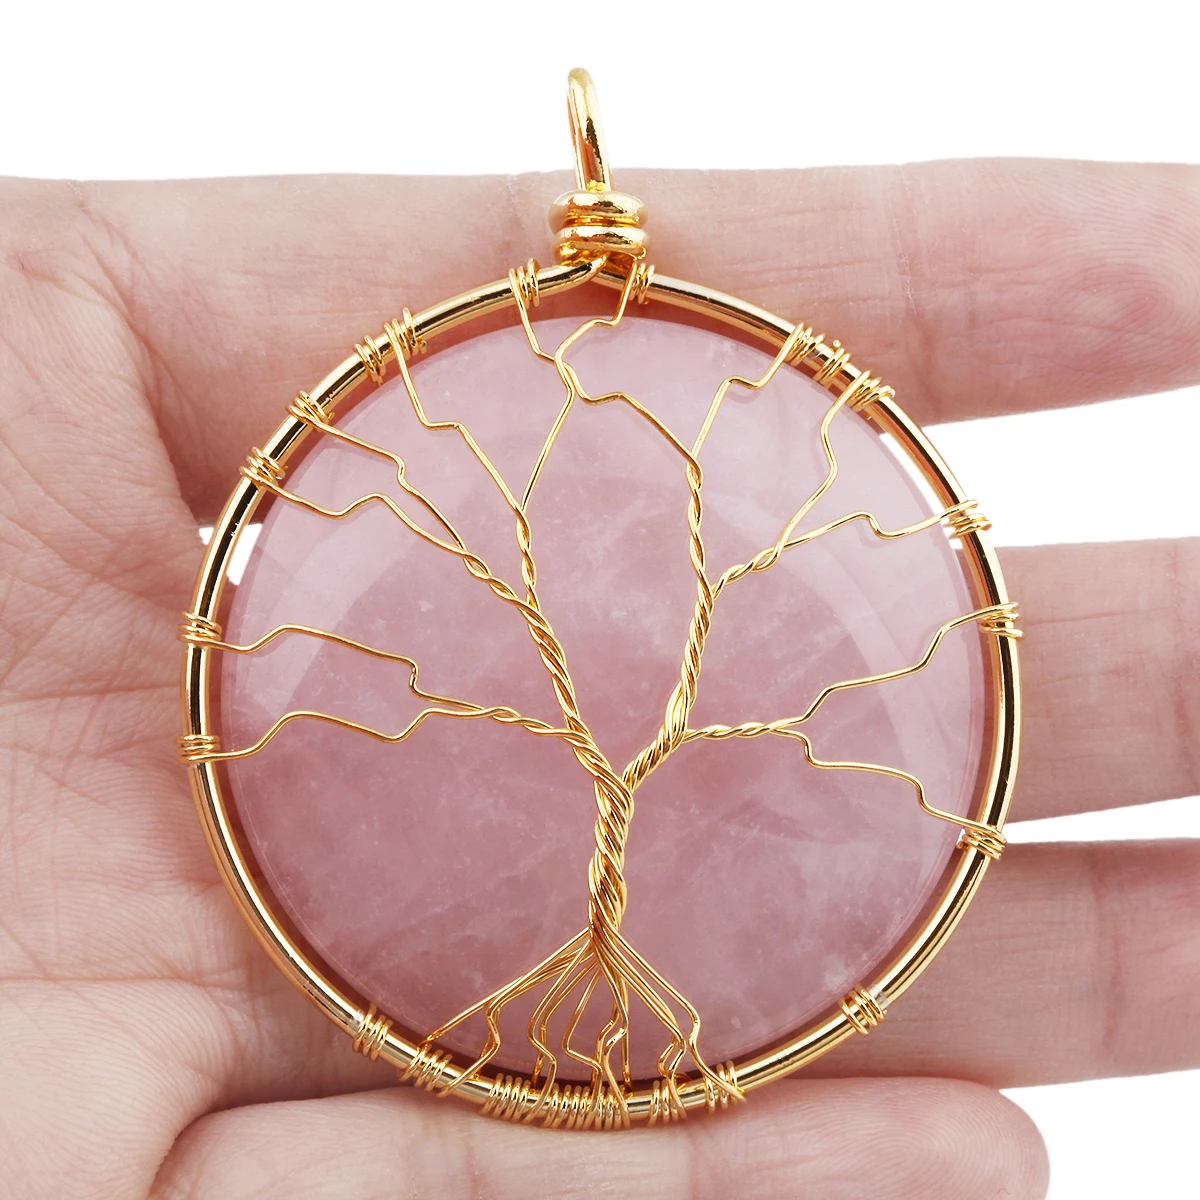 

Round Abalone Shell Pendant Wire Wrapped Tree Of Life Healing Crystal Stone Charms For Jewelry Making DIY Necklace Accessories